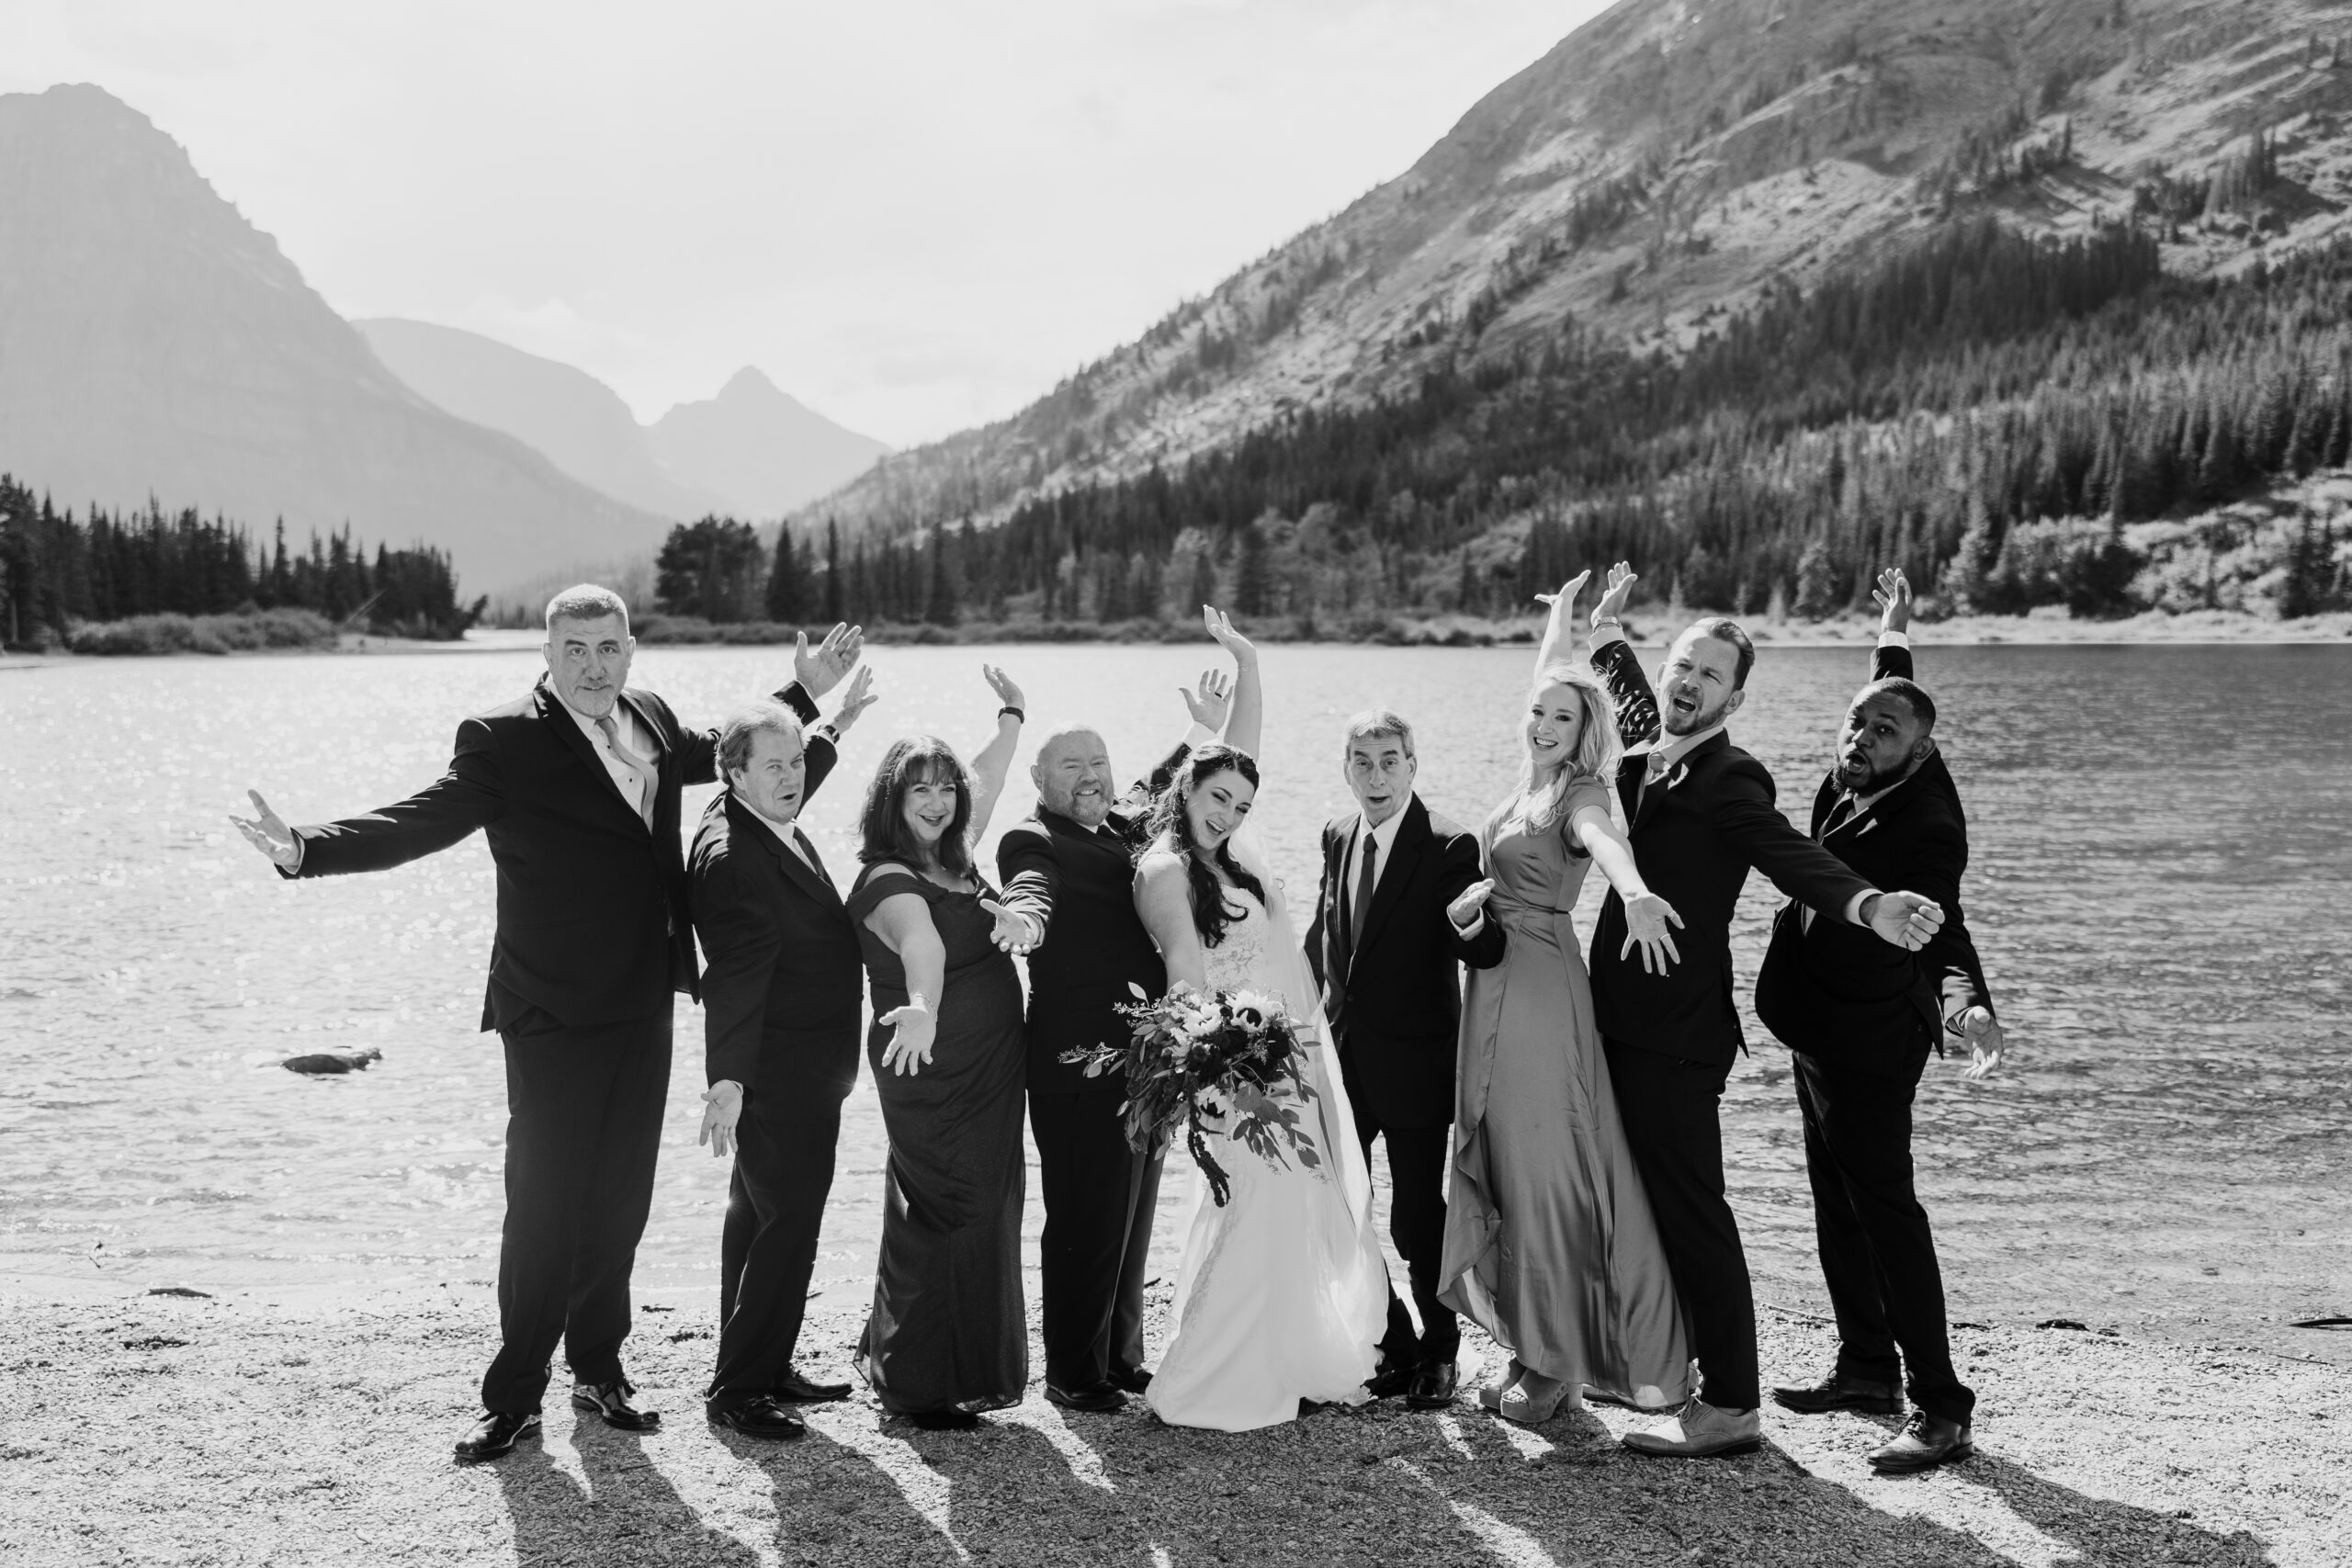 small wedding group holds arms up in a cheer